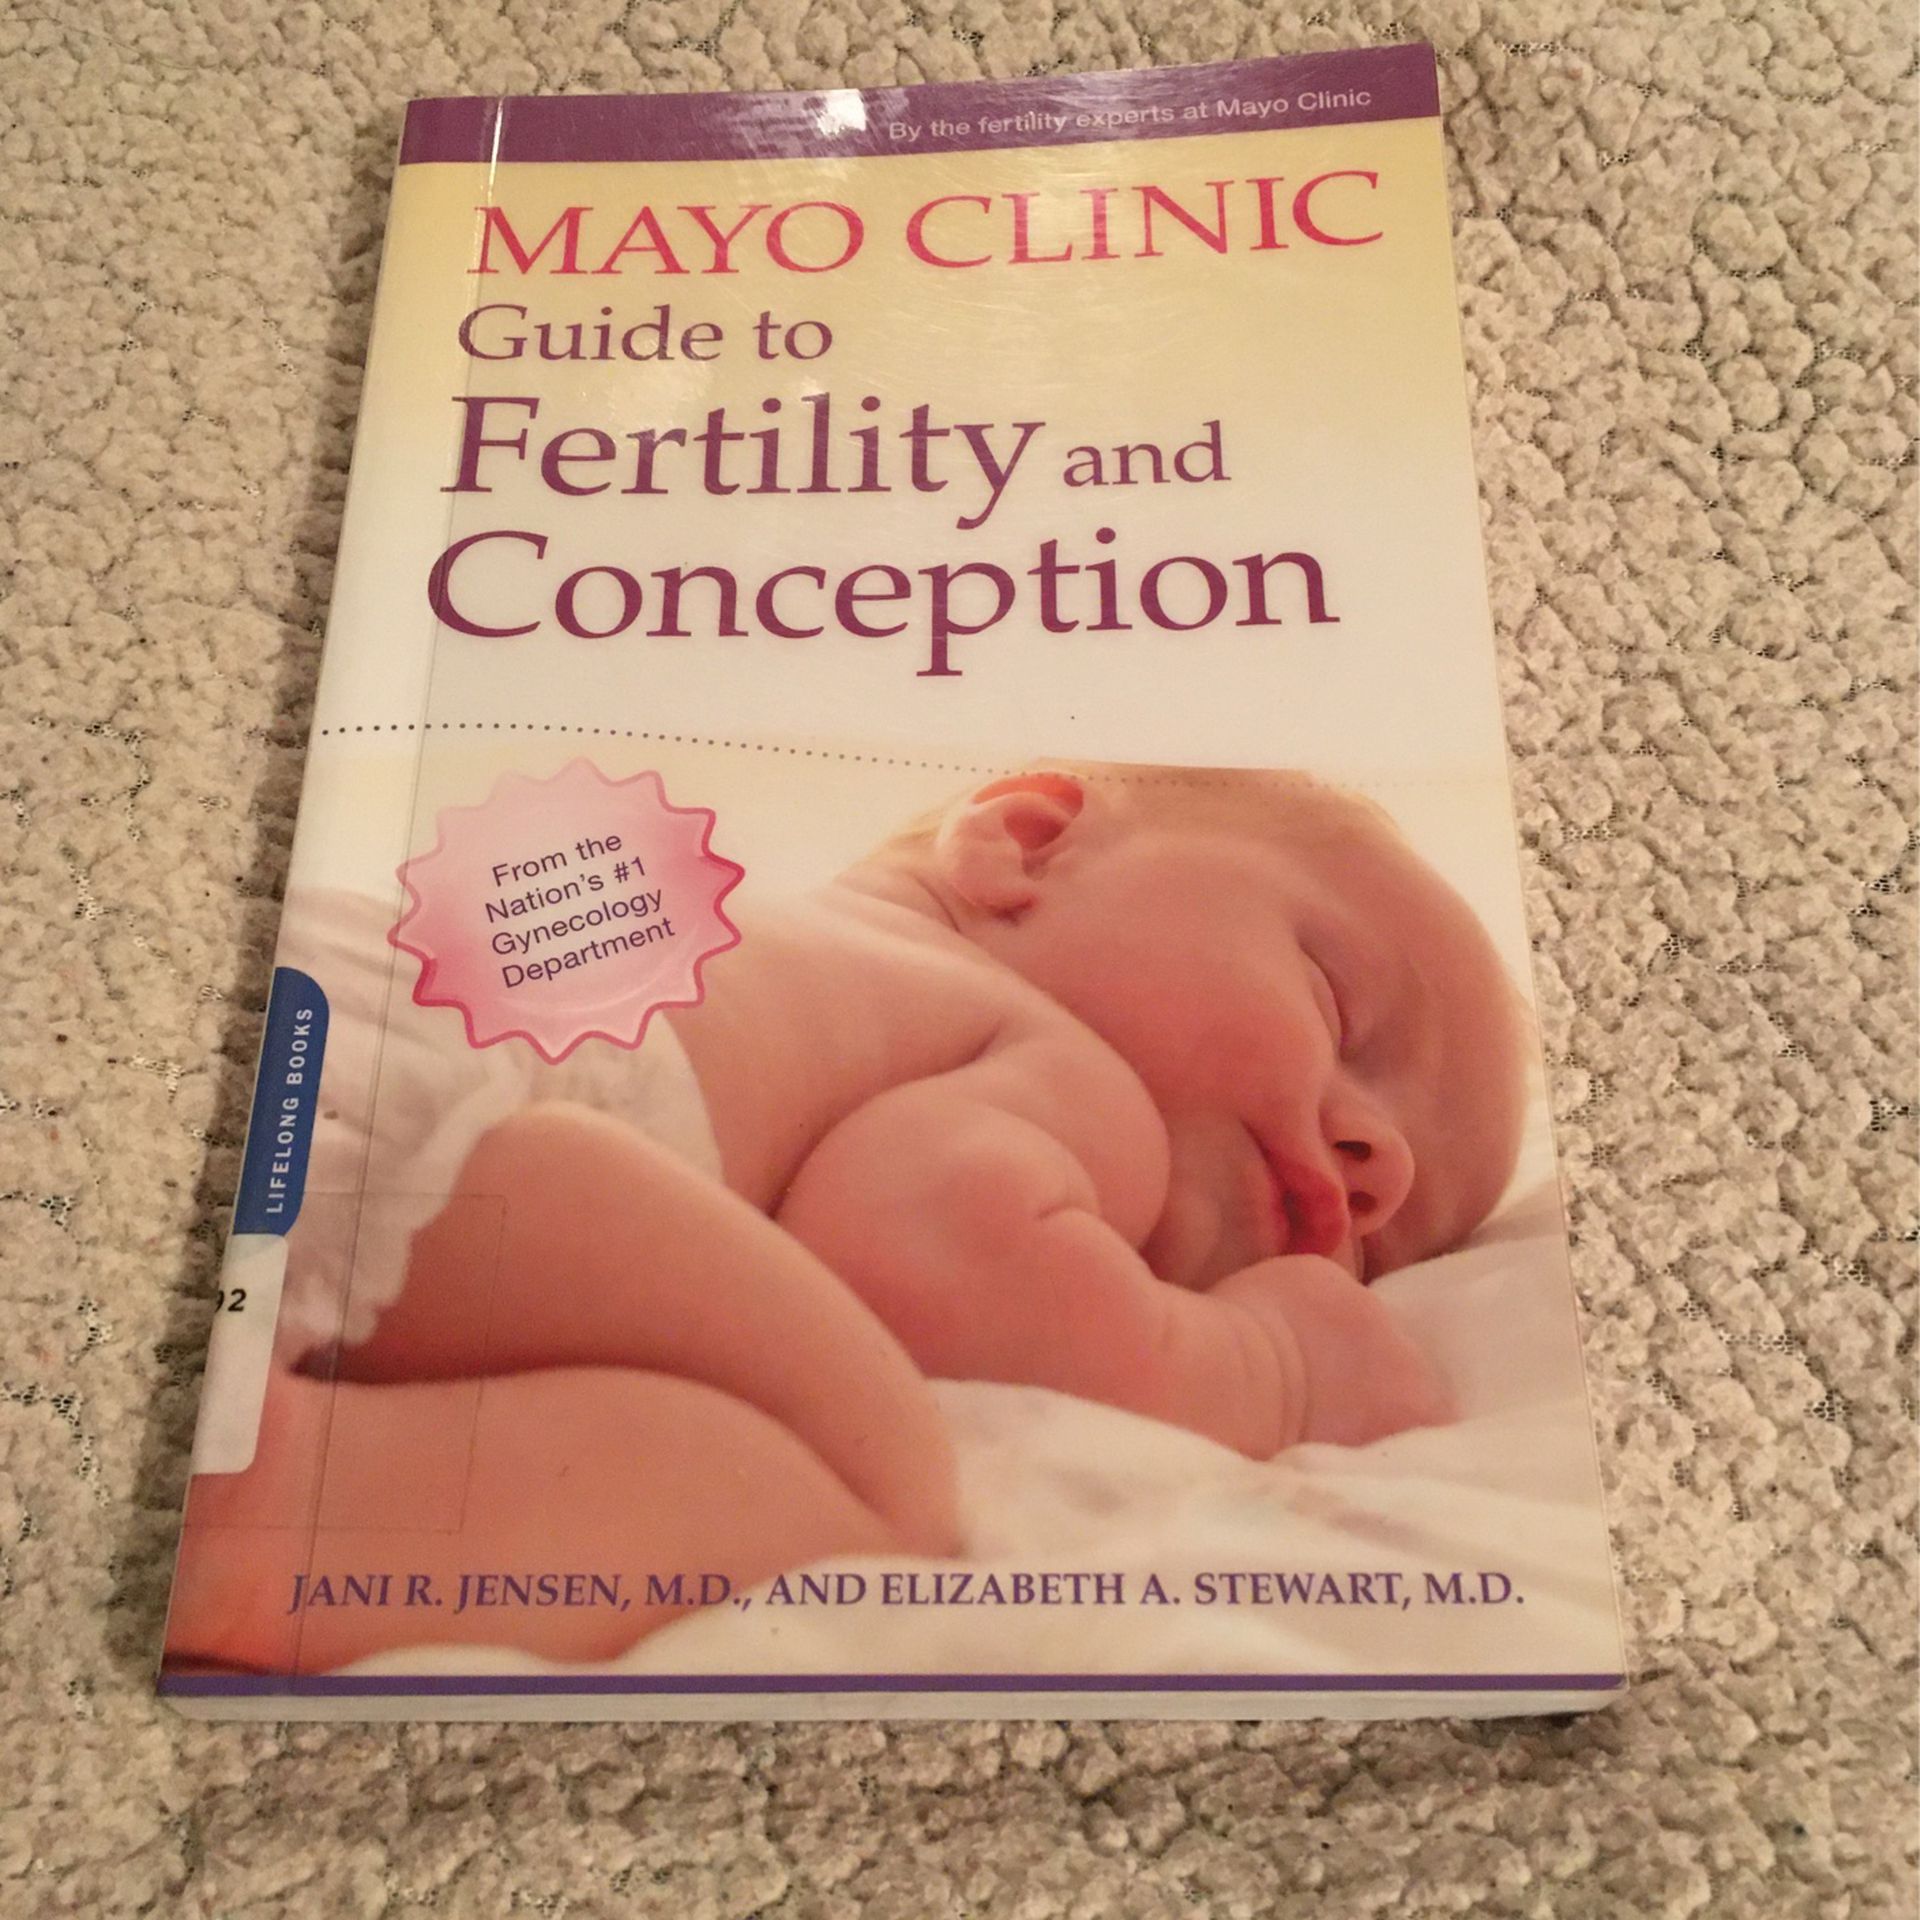 MAYO CLINIC - GUIDE TO FERTILITY AND CONCEPTION